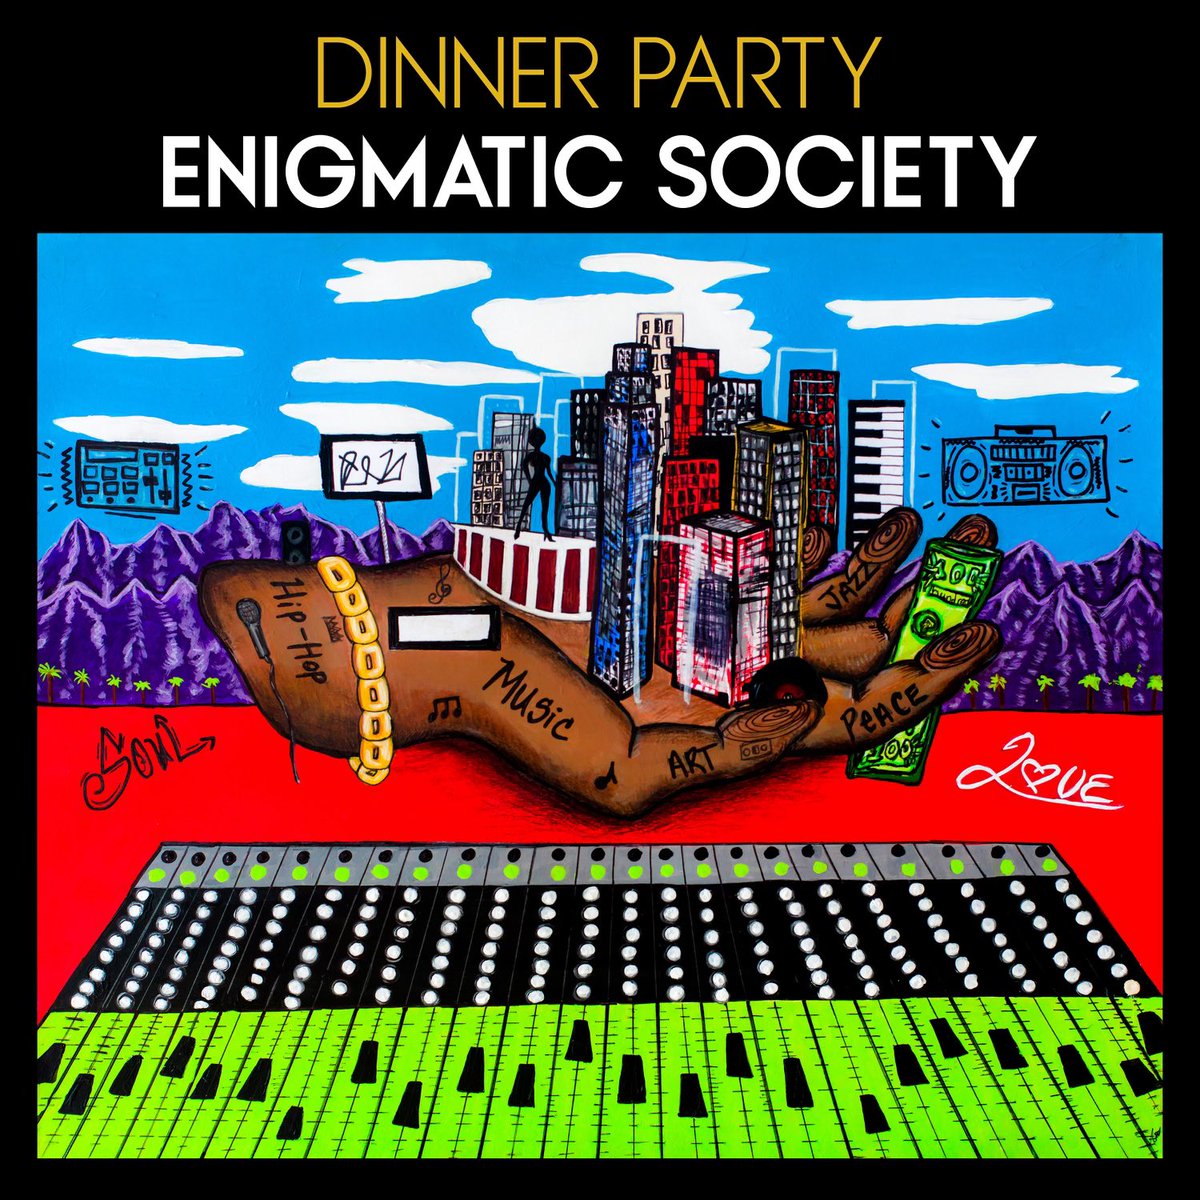 Peace ! Have you heard the new Dinner party album with @KamasiW @robertglasper @9thwonder & myself ? If not give it a play